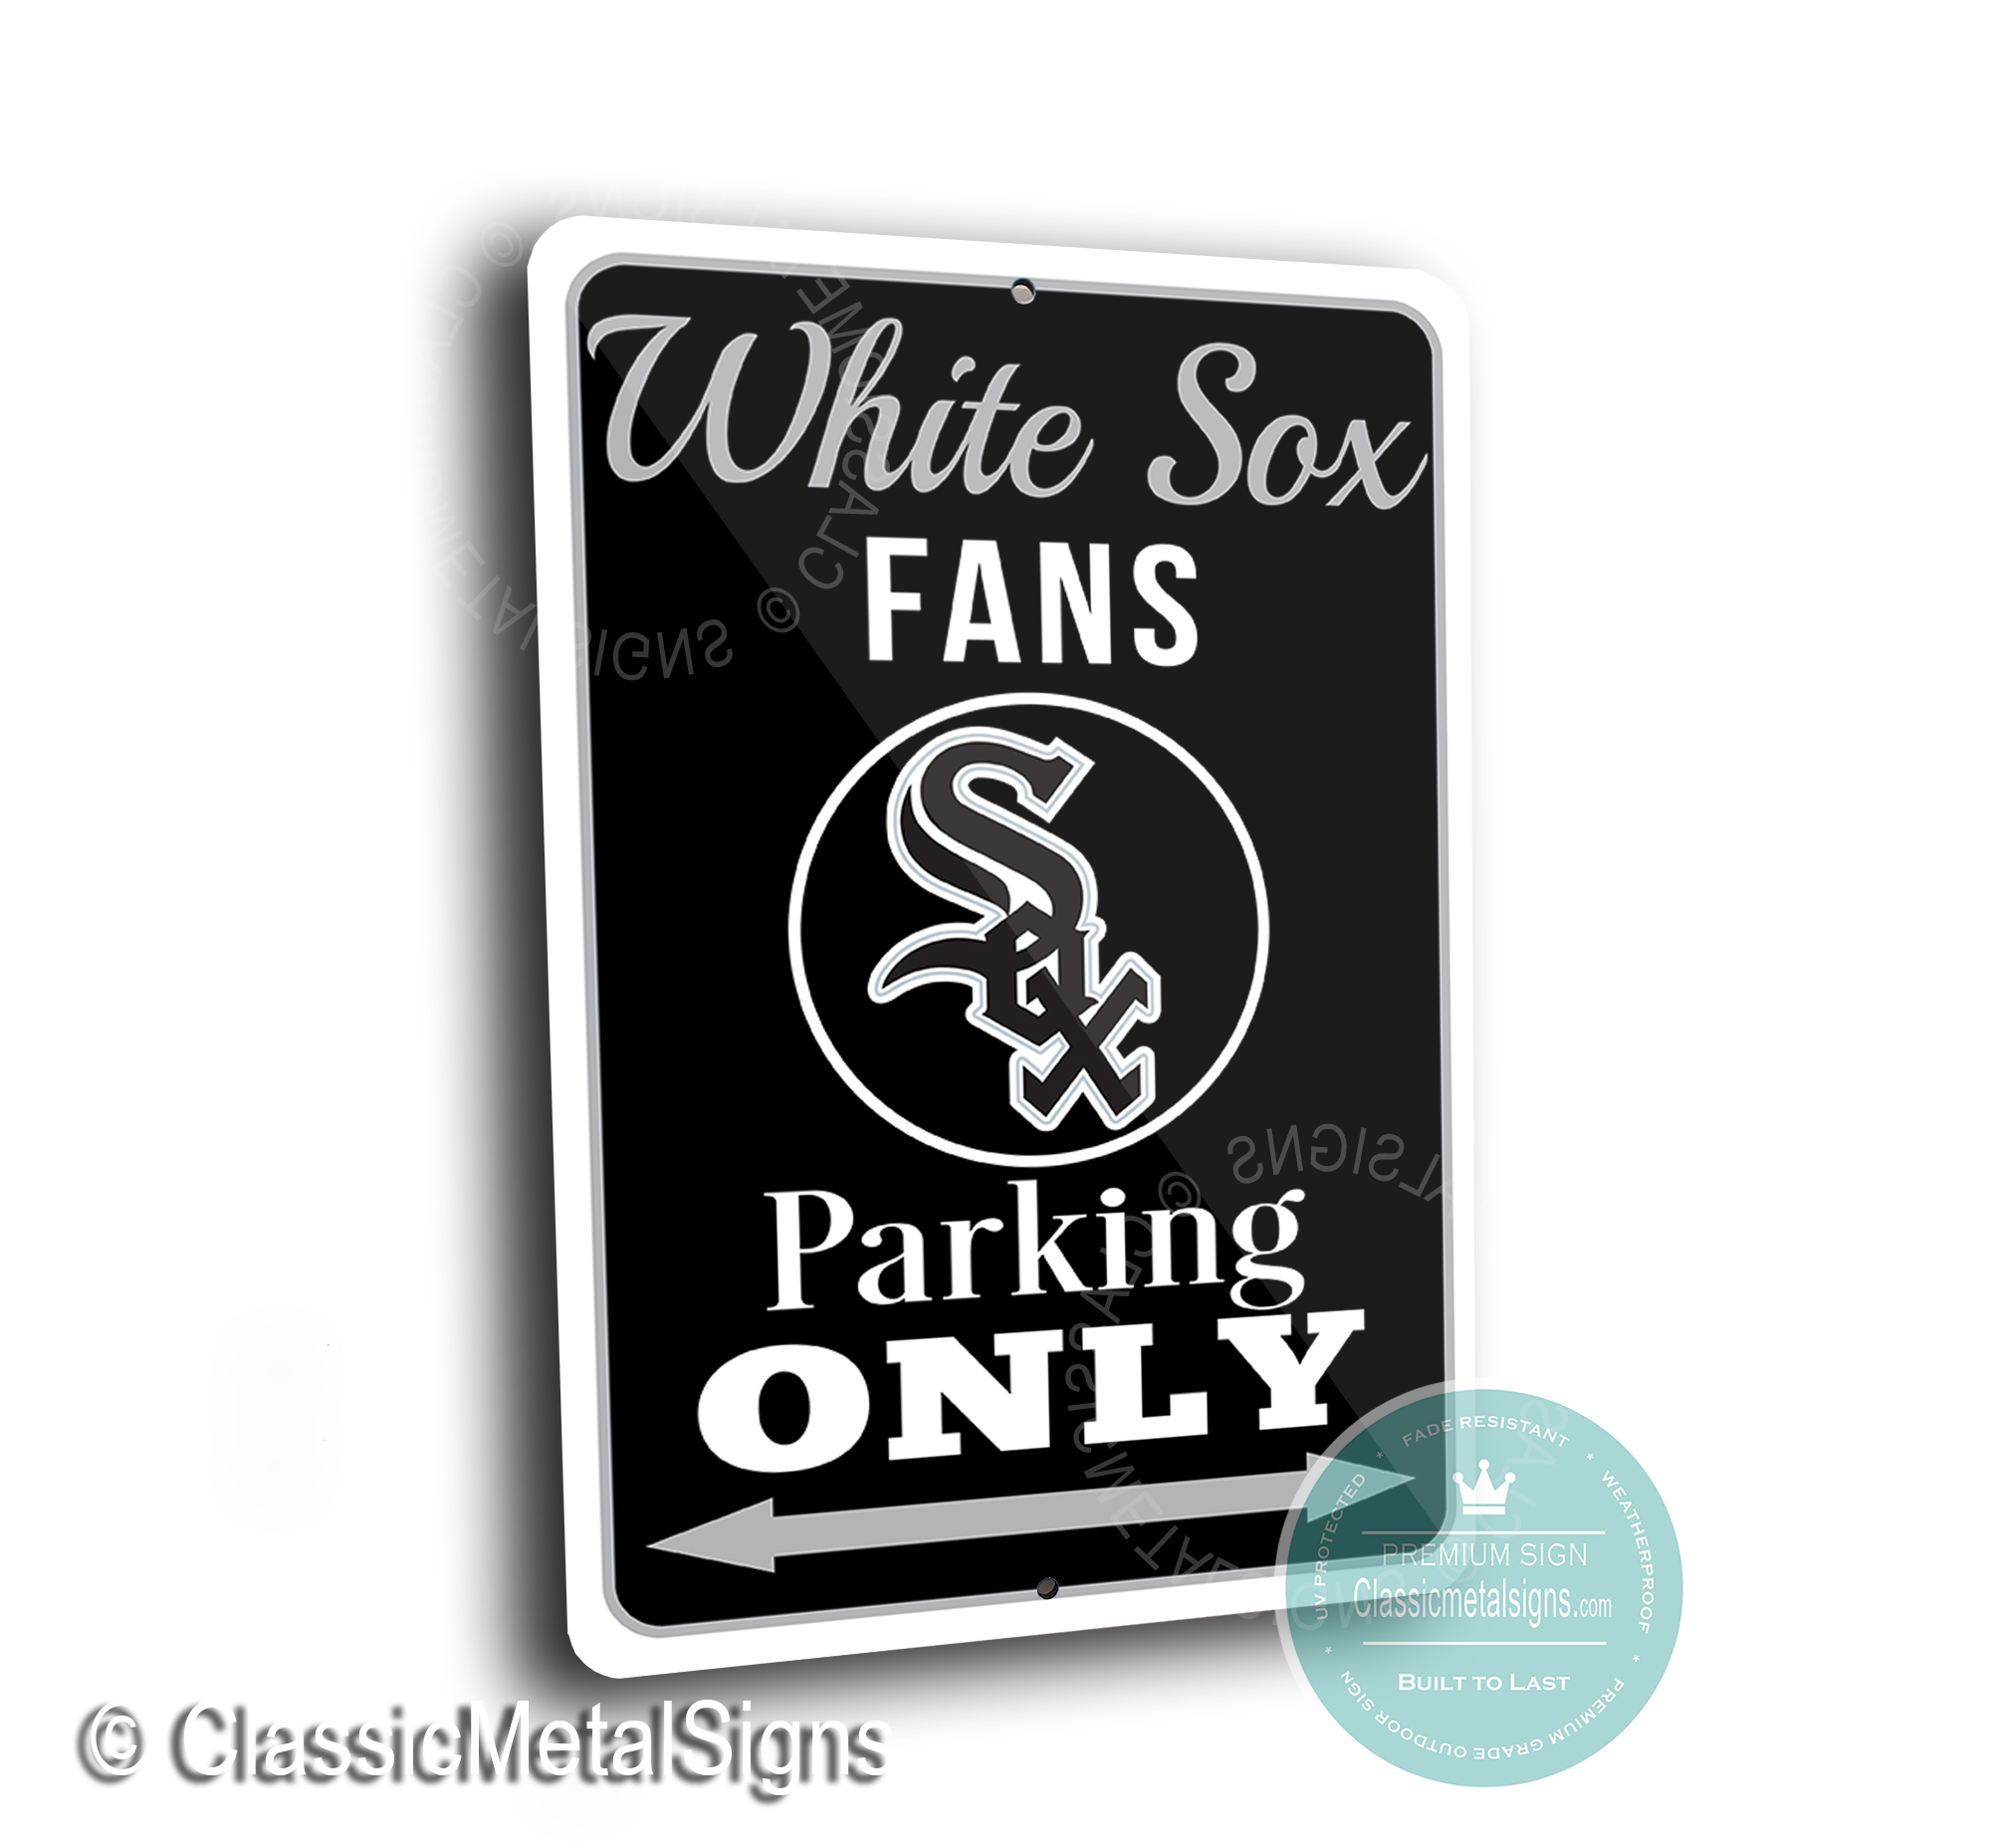 Chicago White Sox Parking Only Sign